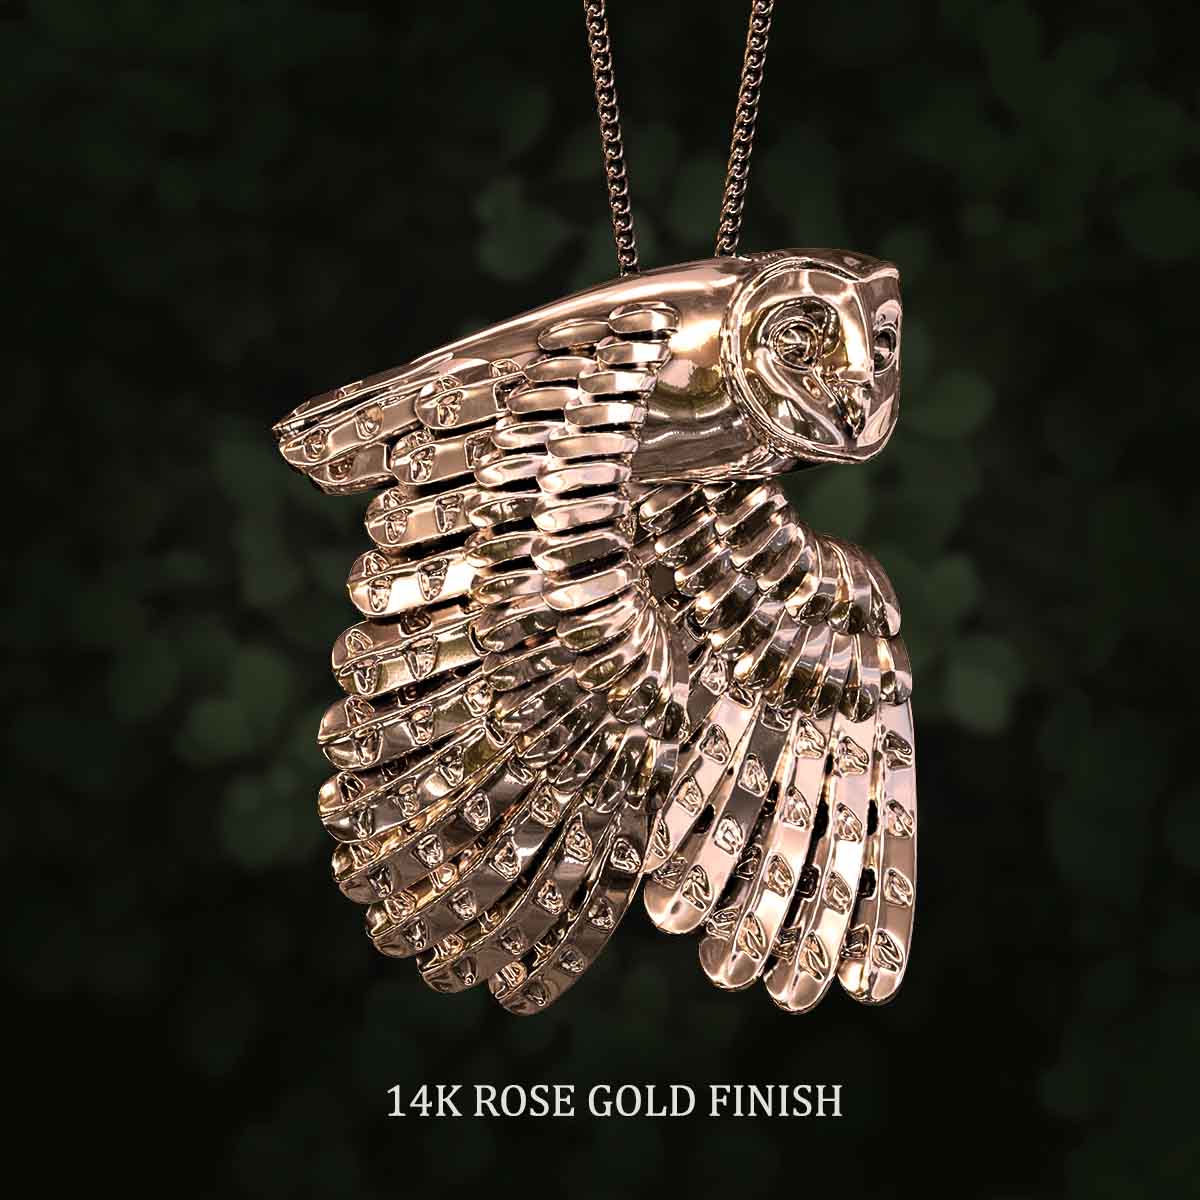 14k-Rose-Gold-Finish-Flying-Barn-Owl-Pendant-Jewelry-For-Necklace